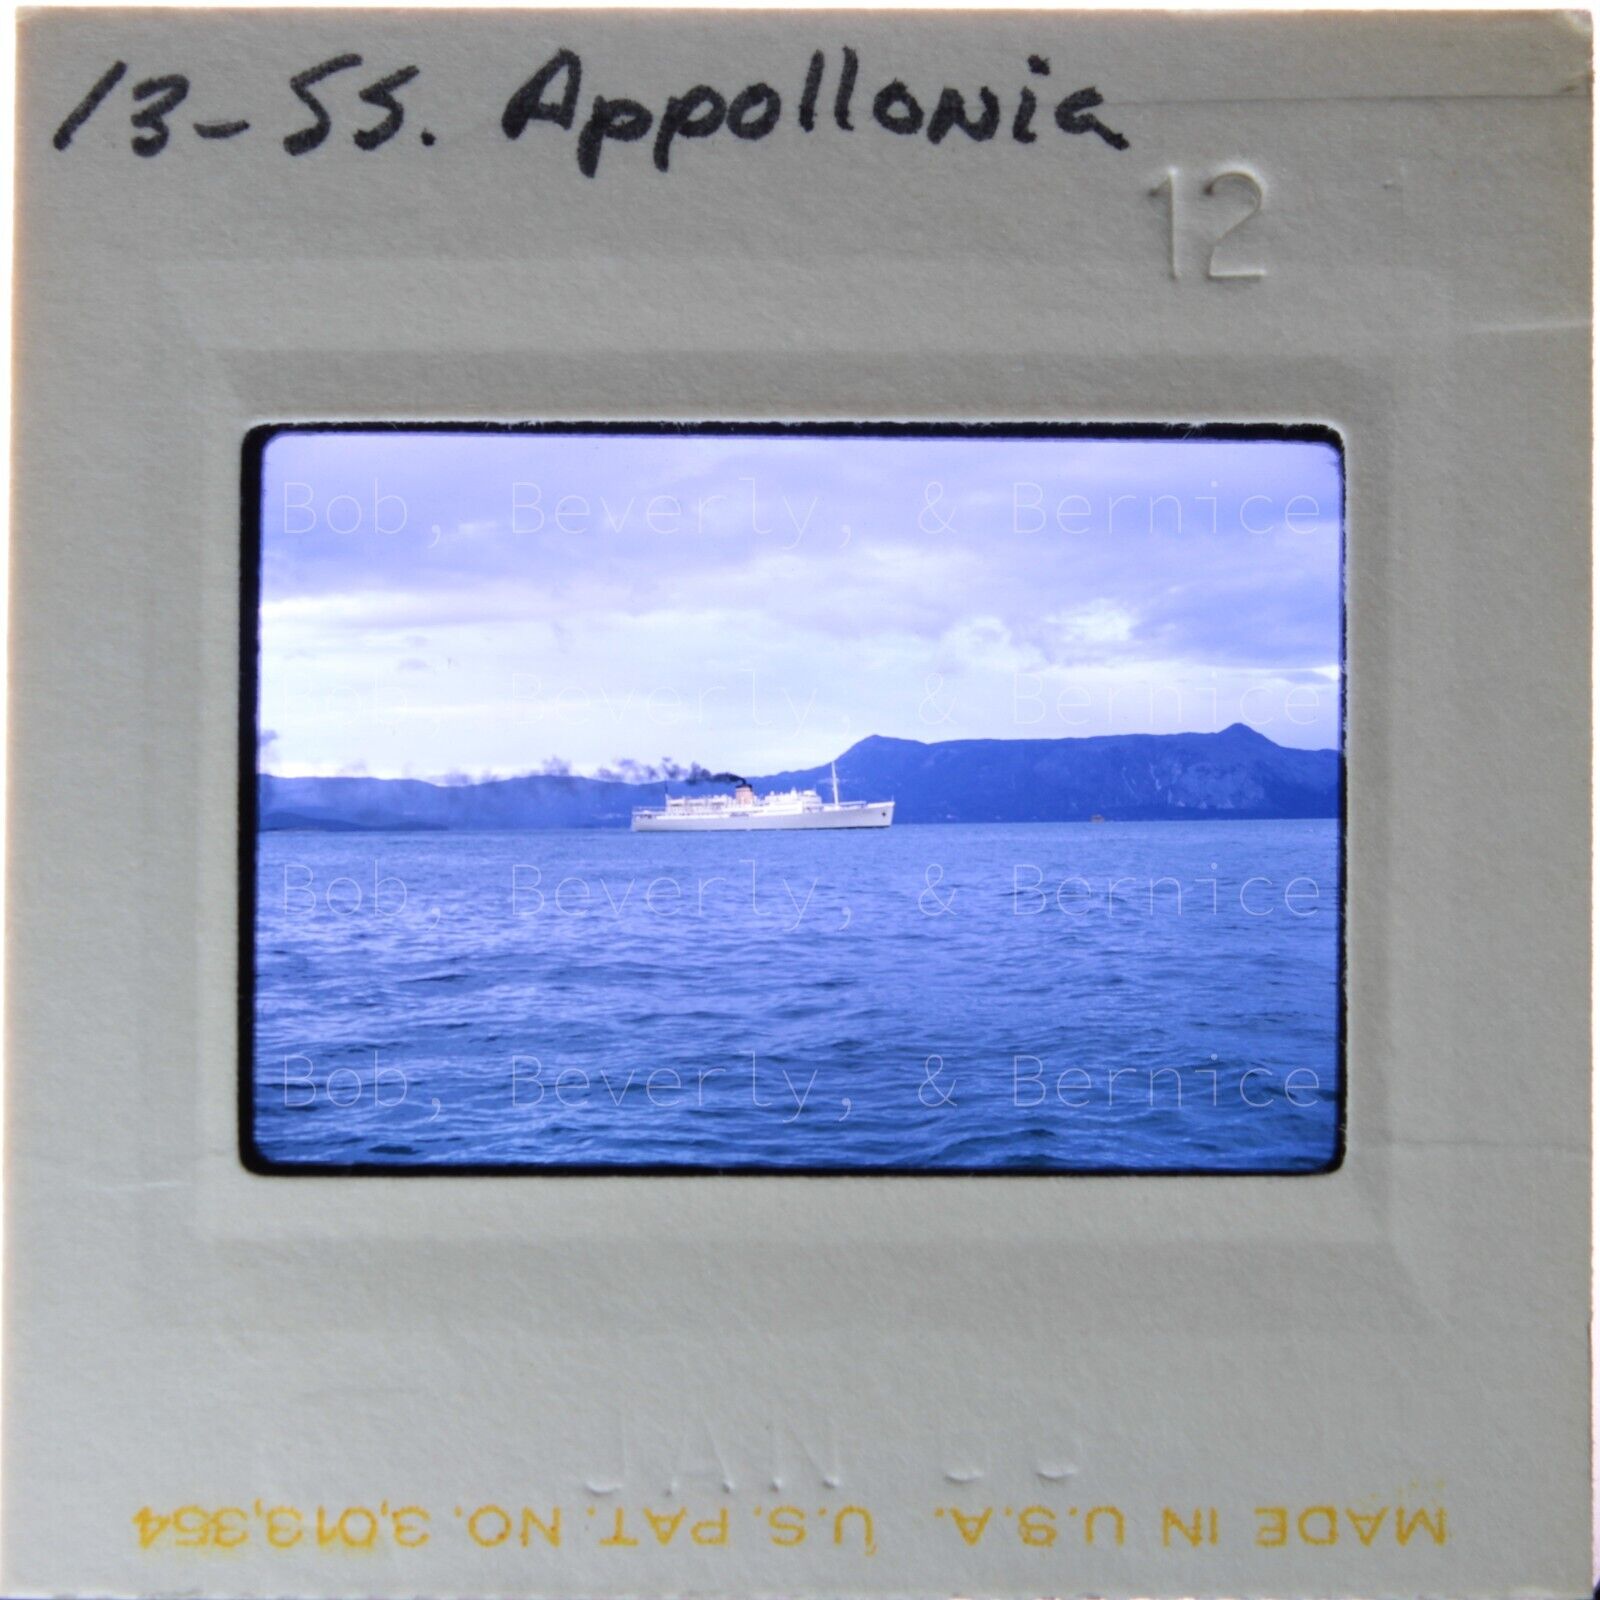 Vintage 35mm Slide Photo — SS Appollonia Ship Sea Water Mountains Europe — 1968